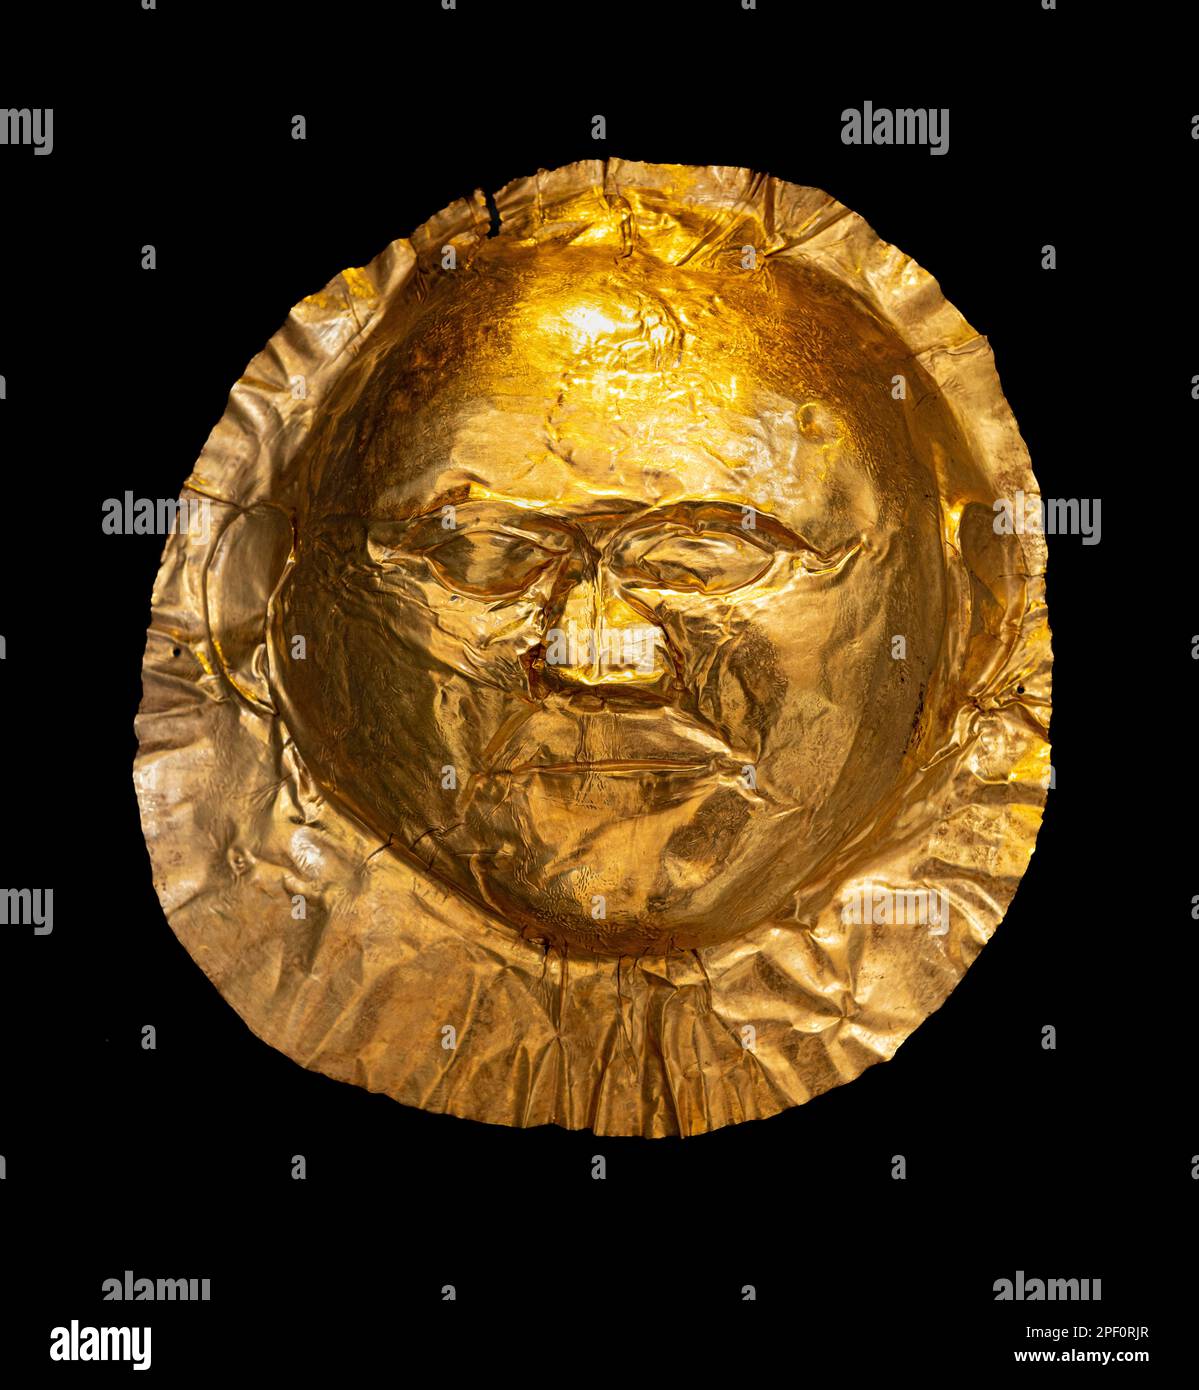 A 16th Century BC,  gold, funerary mask from grave V of grave circle A at Ancient Mycenae, Peloponnese, Greece. Stock Photo